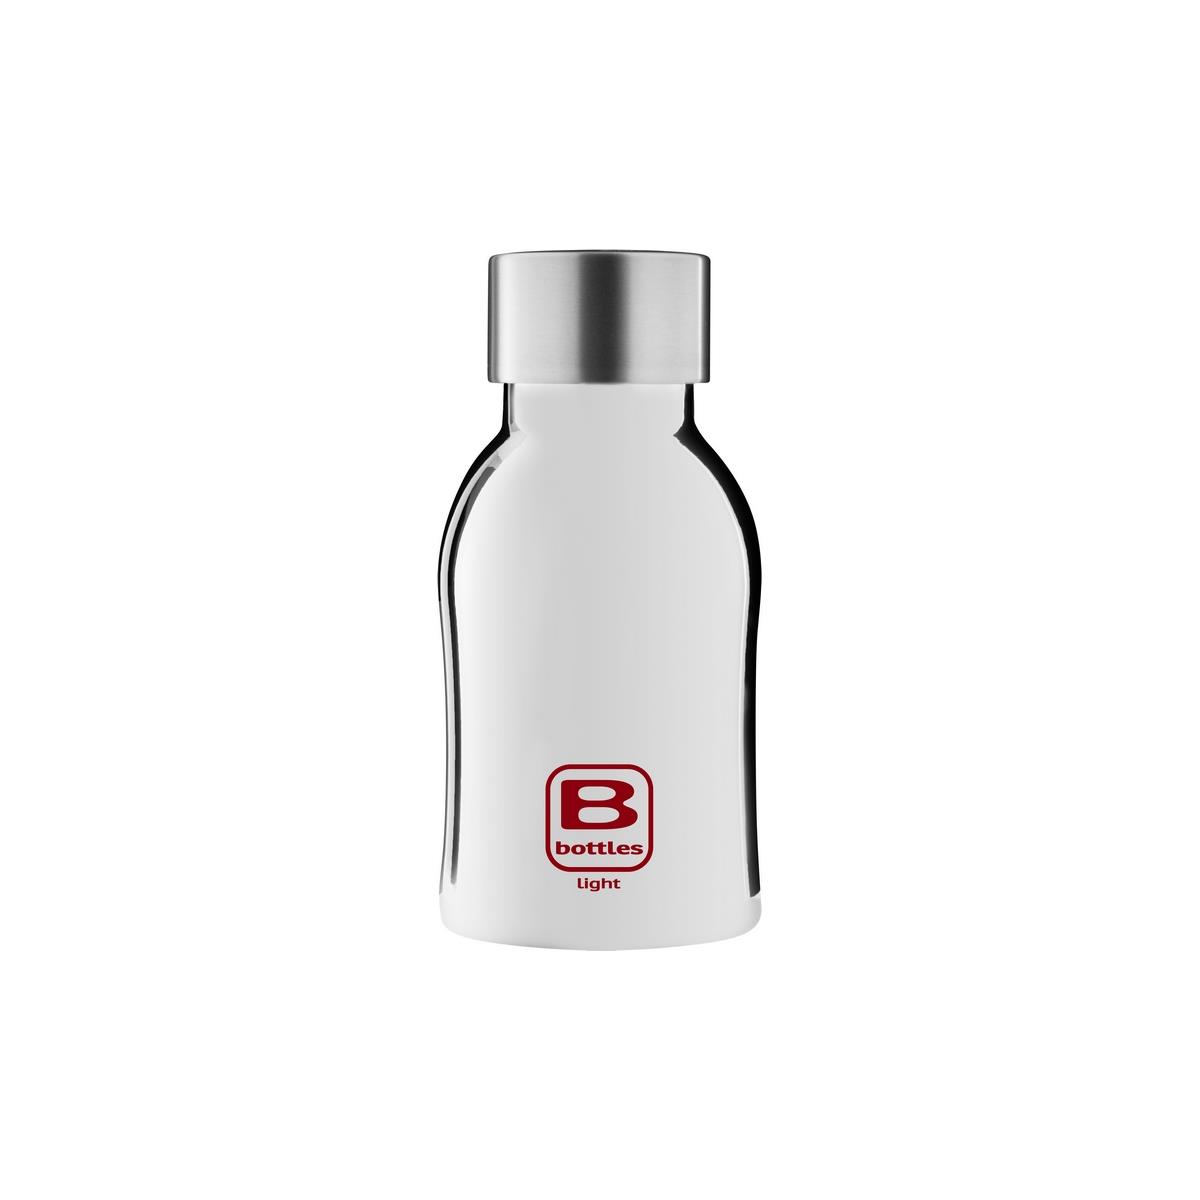 B Bottles Light - Silver Lux - 350 ml - Ultra light and compact 18/10 stainless steel bottle